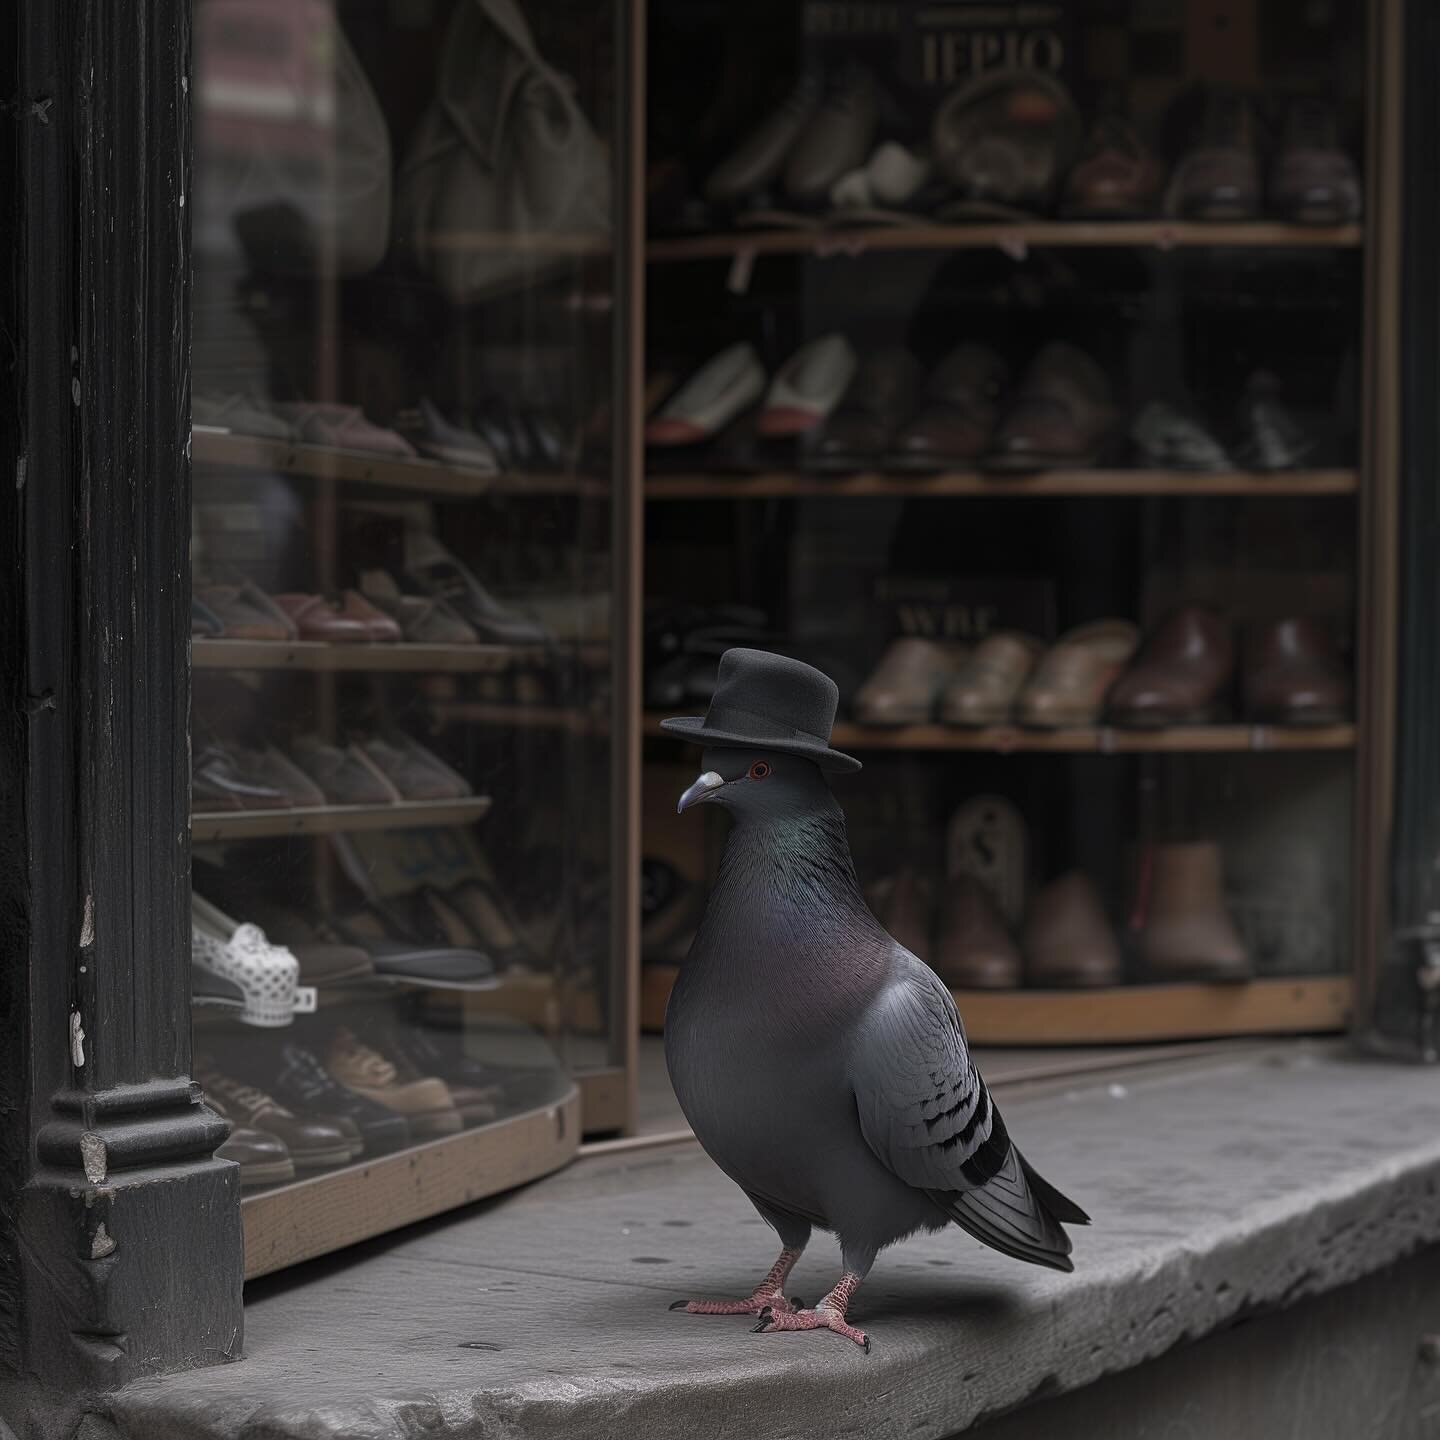 &ldquo;A cool pigeon shoplifting&rdquo;

Made with MidJourney v6

#aiart #aigeneratedart #generativeart #digitalart #art #aiartcommunity #midjourney #midjourneyai #midjourneyv6 #pigeon #pigeons